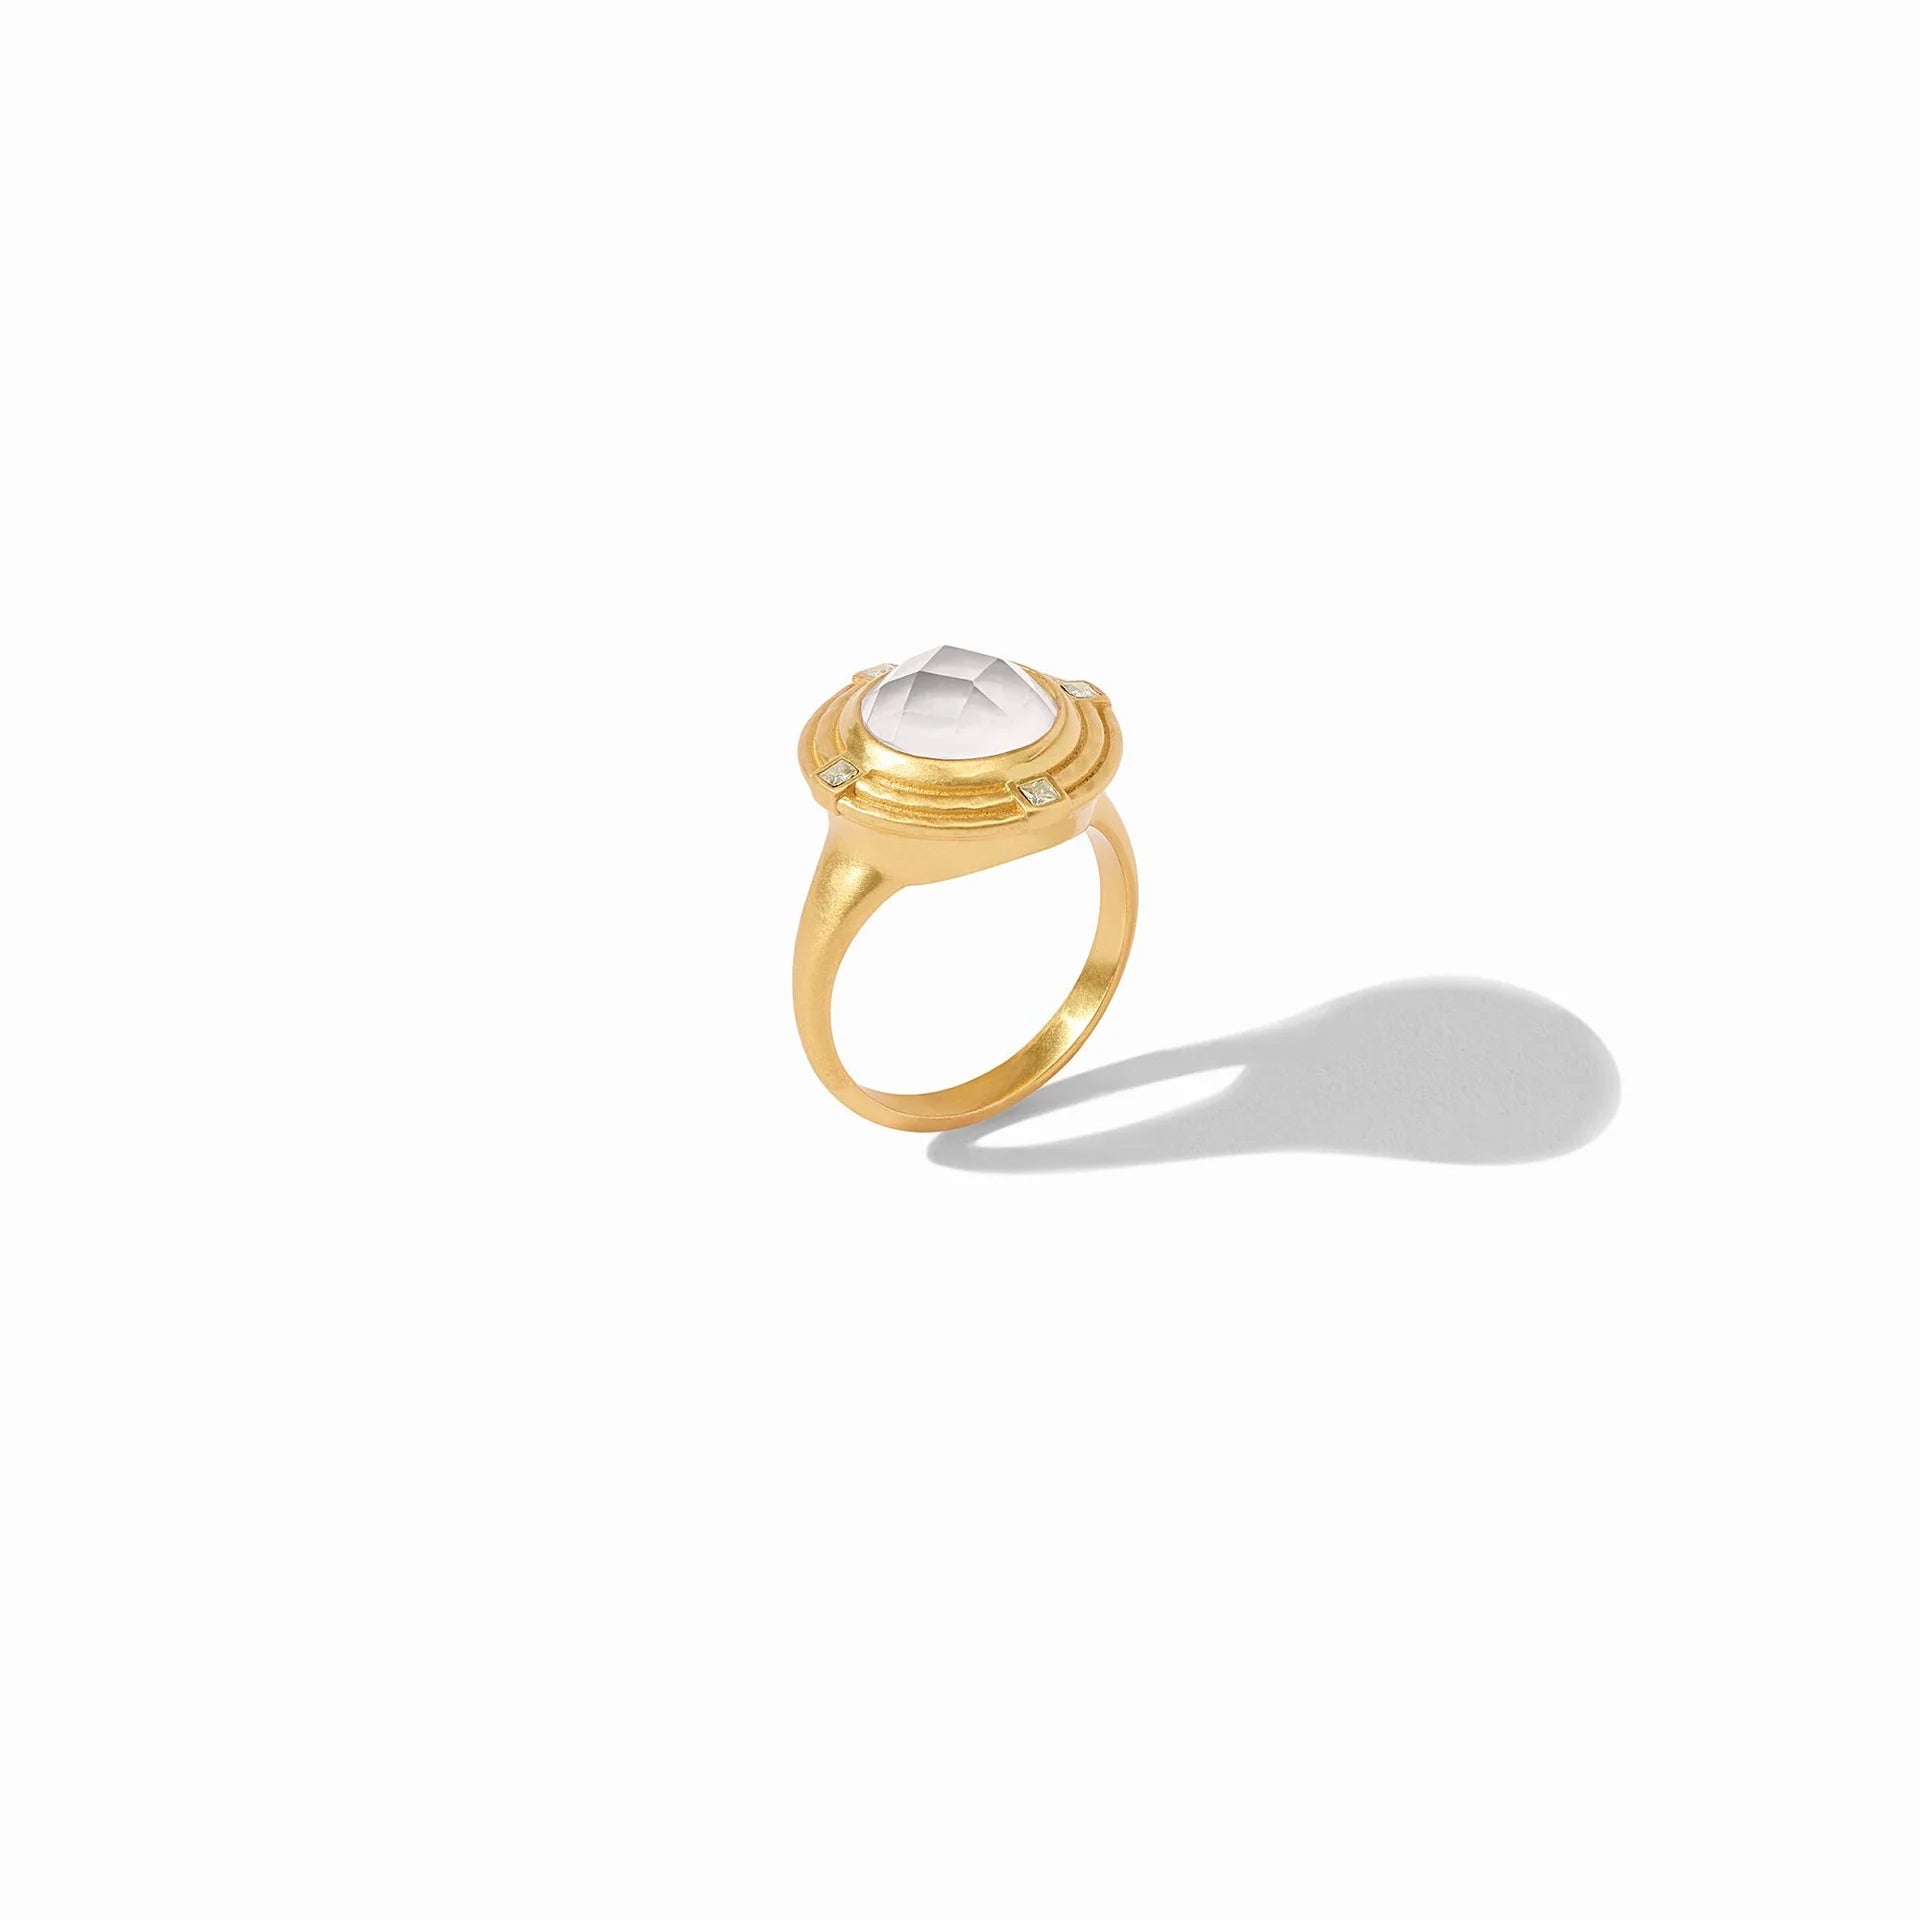 Astor Ring - Iridescent Clear Crystal by Julie Vos signet ring featuring a sparkling rose cut gem set in a surround of two lightly hammered golden walls embellished with four CZs. 24K gold plate, imported glass, CZ Width: 0.65 inches. Shop at The Painted Cottage an Annapolis boutique.